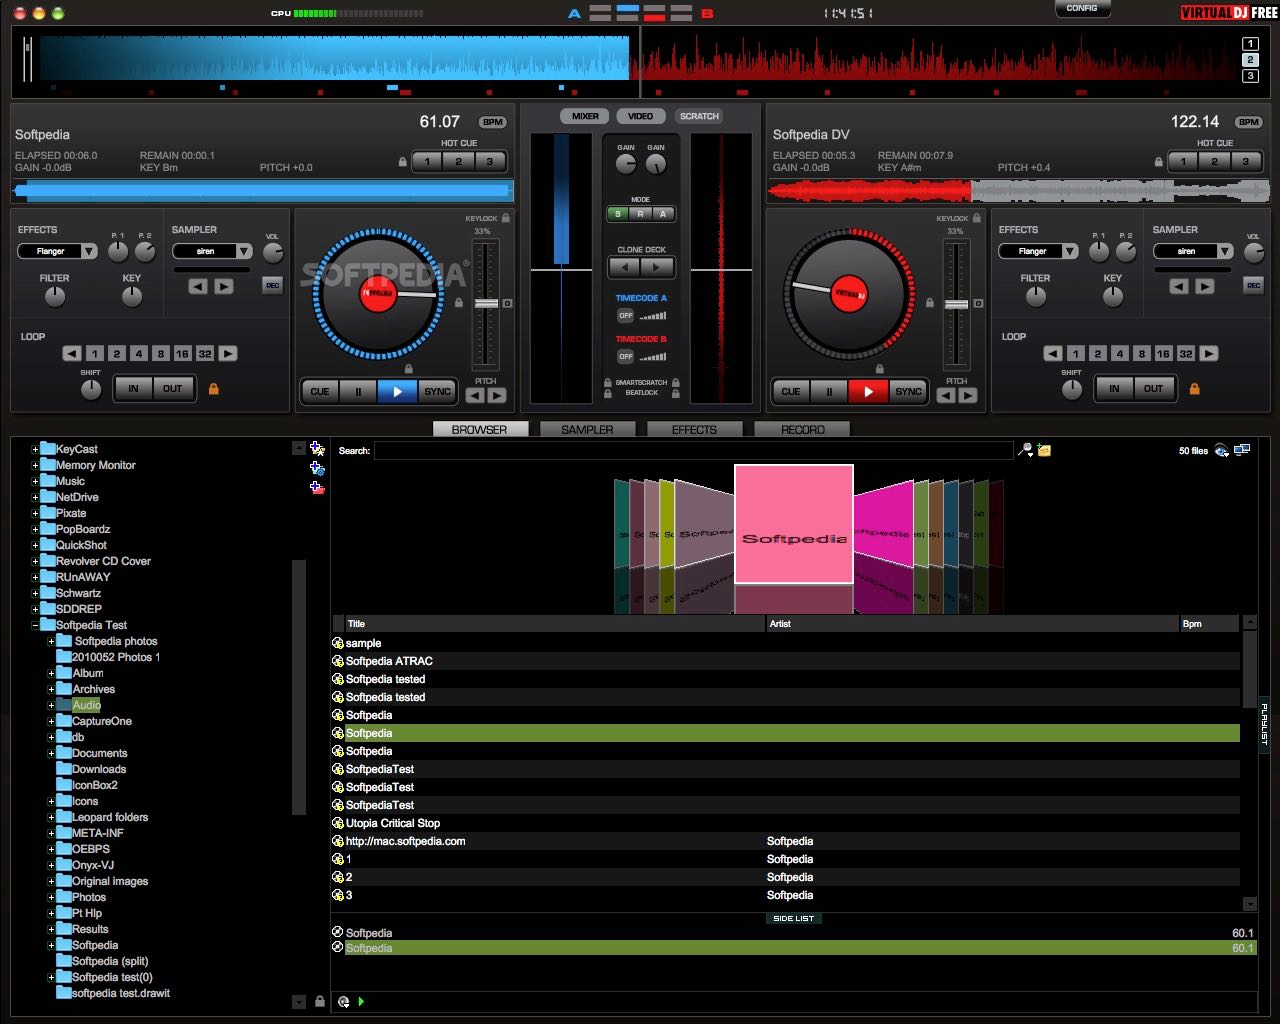 Virtual Dj Video Effects Pack Download